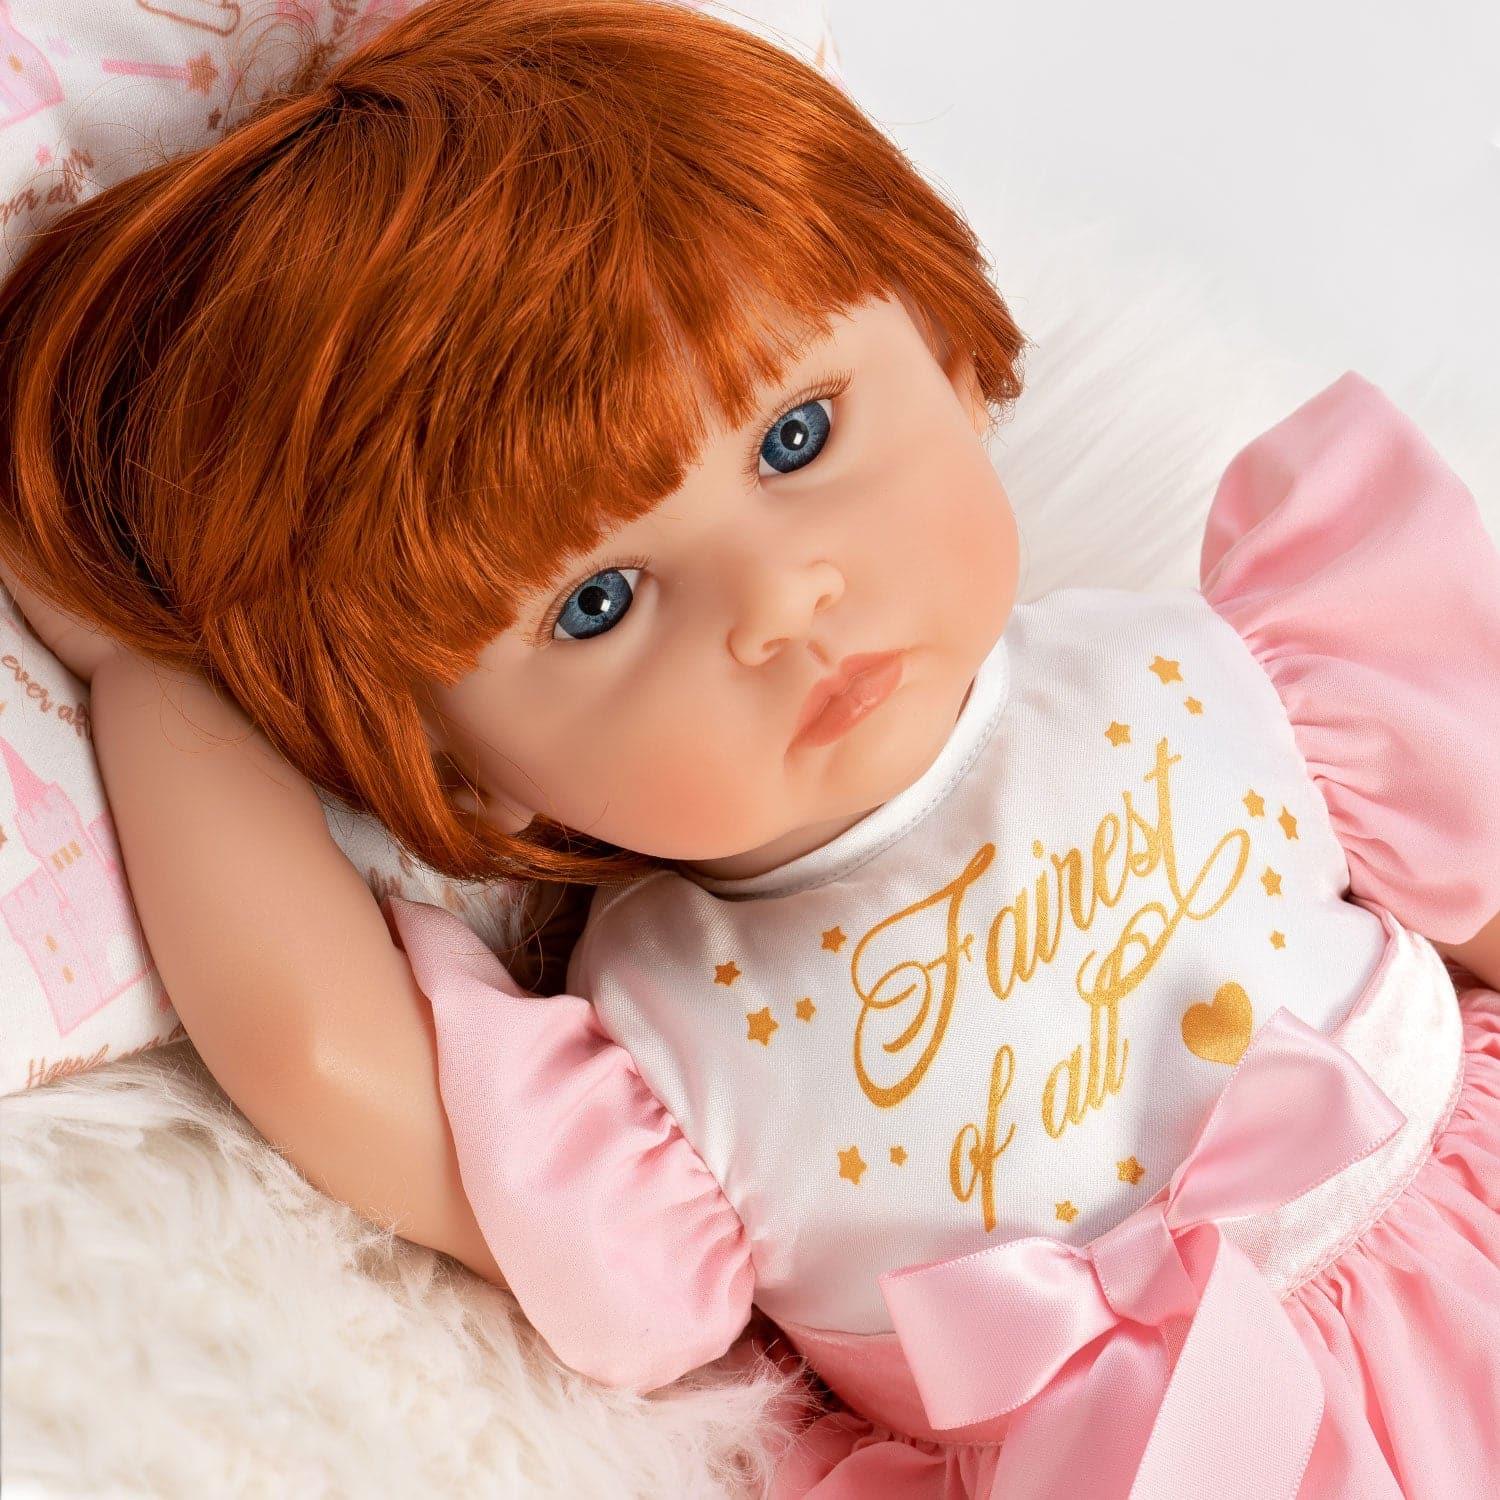 Paradise Galleries Reborn Toddler - Once a Upon - 20 inches